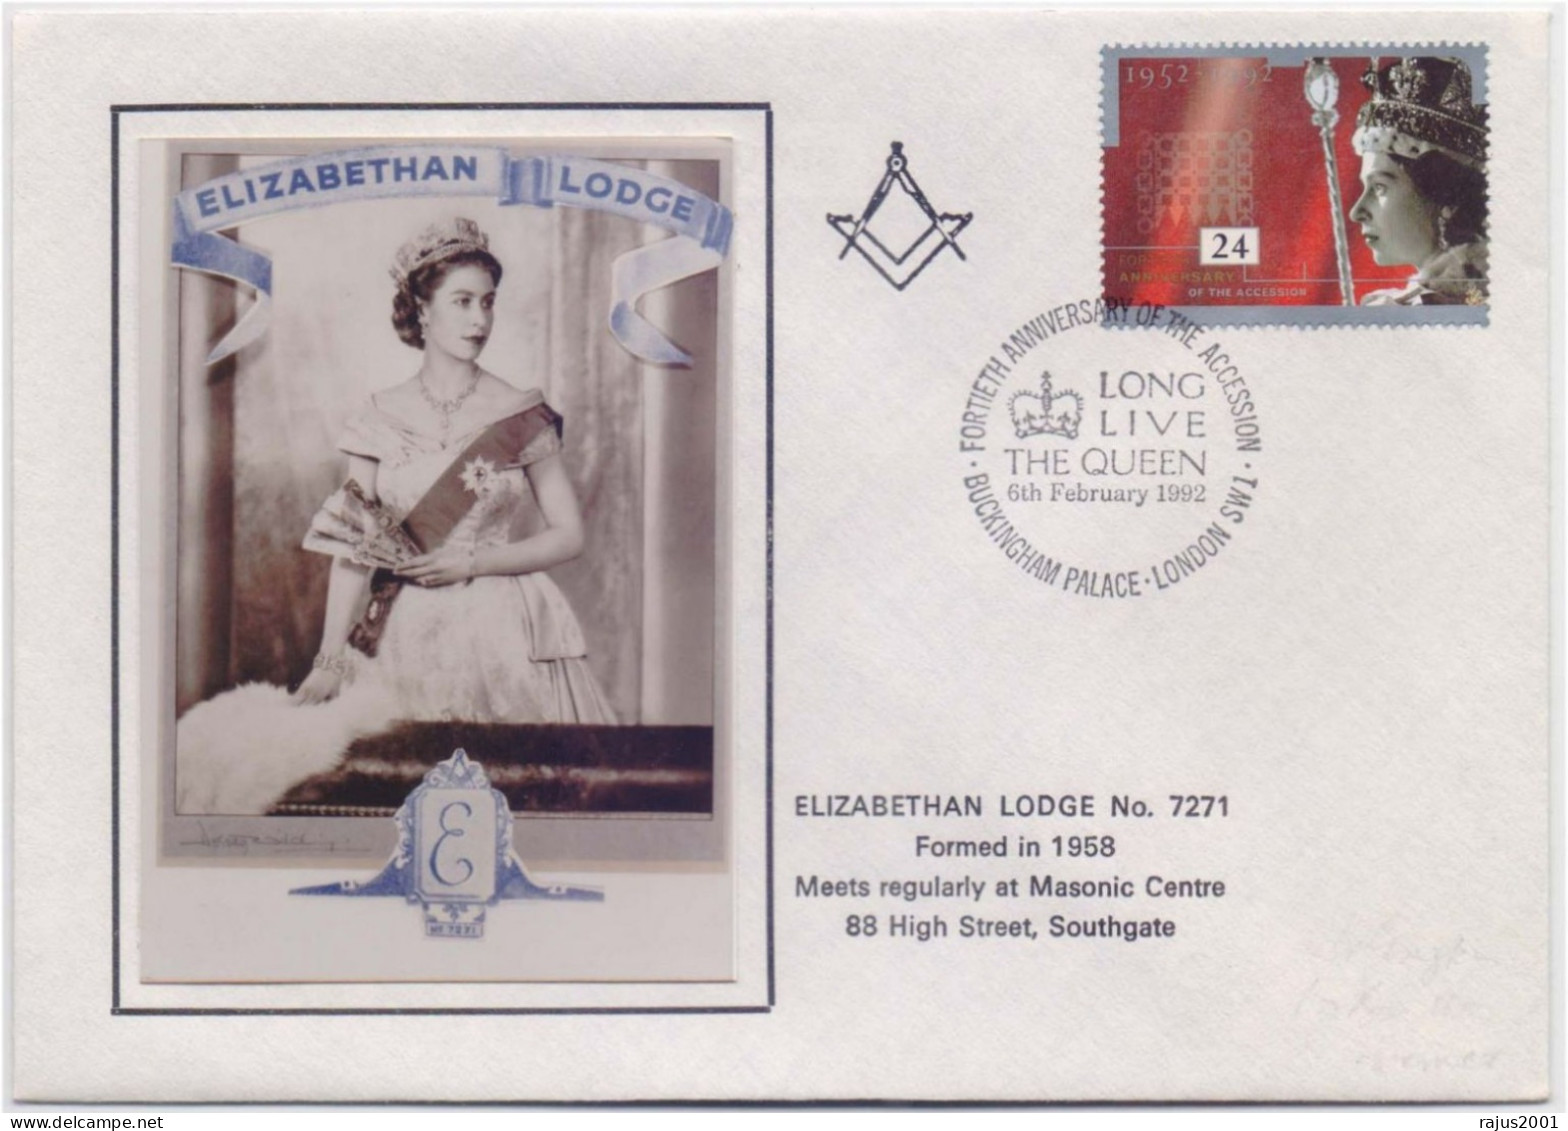 ELIZABETHAN LODGE NO 7271 FORMED IN 1958, Queen Elizabeth, Freemasonry, Masonic Limited Only 100 Cover Issued Cover - Freimaurerei